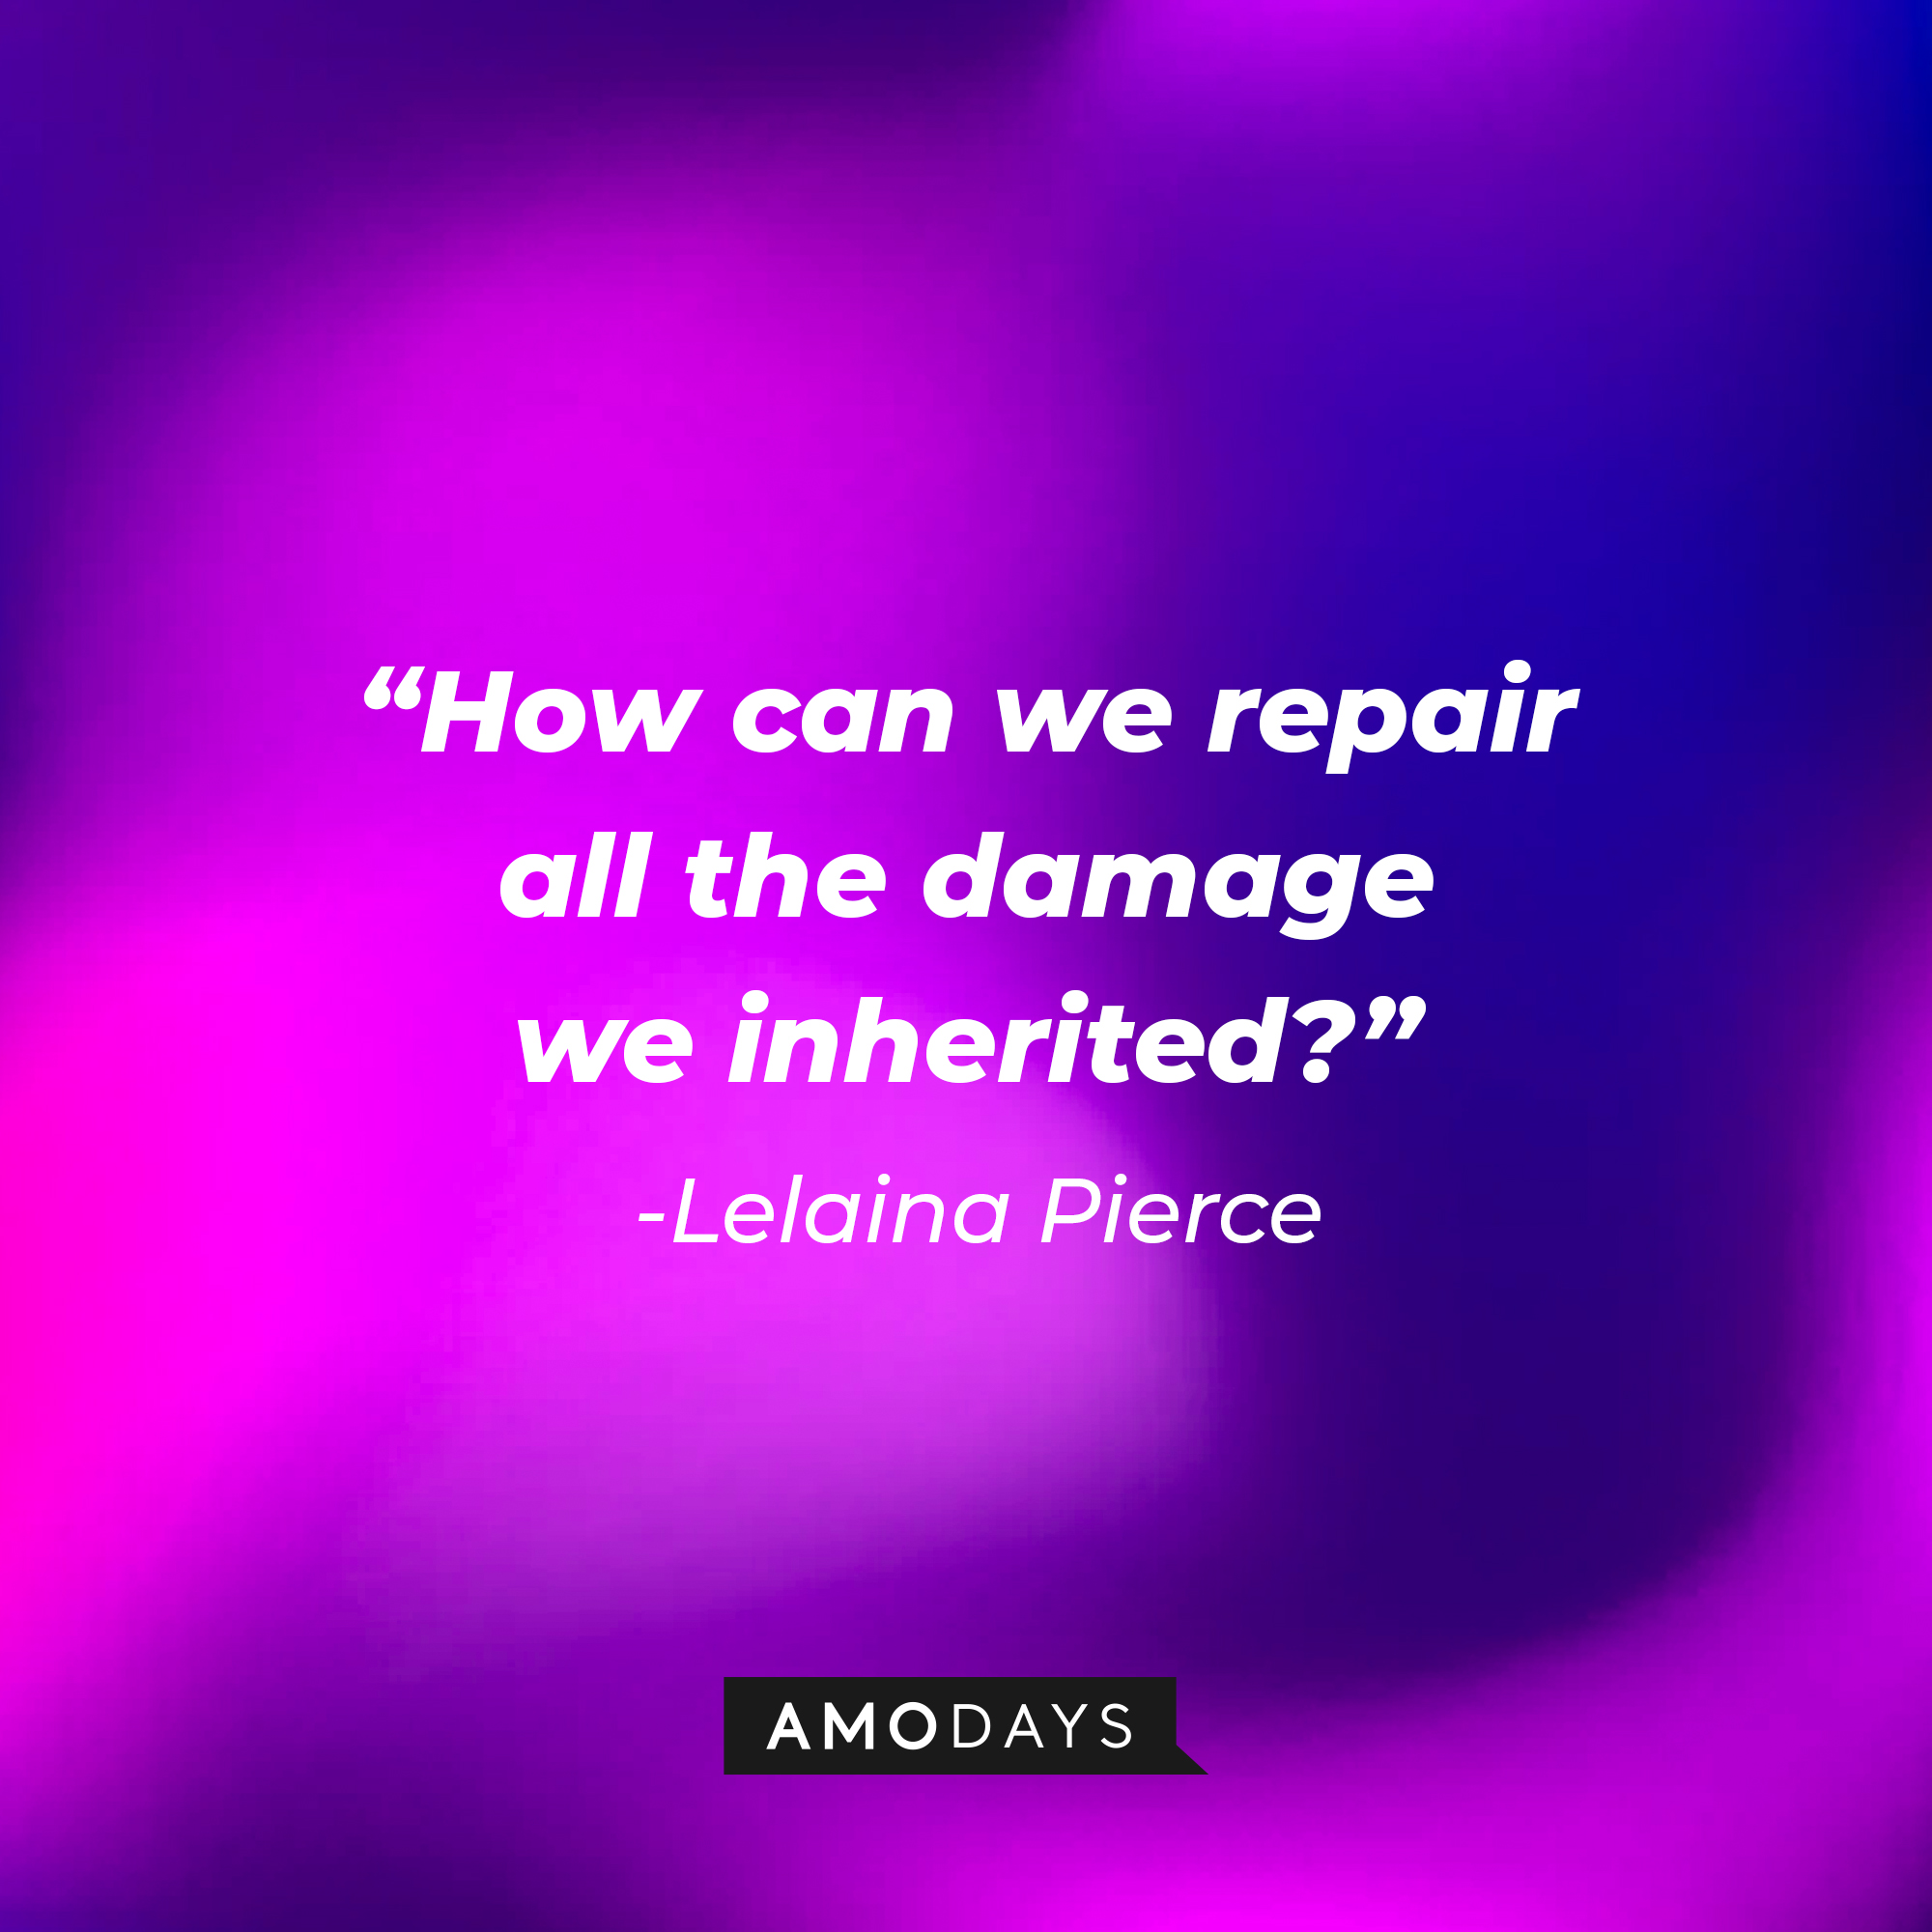 Lelaina Pierce’s quote: "How can we repair all the damage we inherited?" | Source: AmoDays